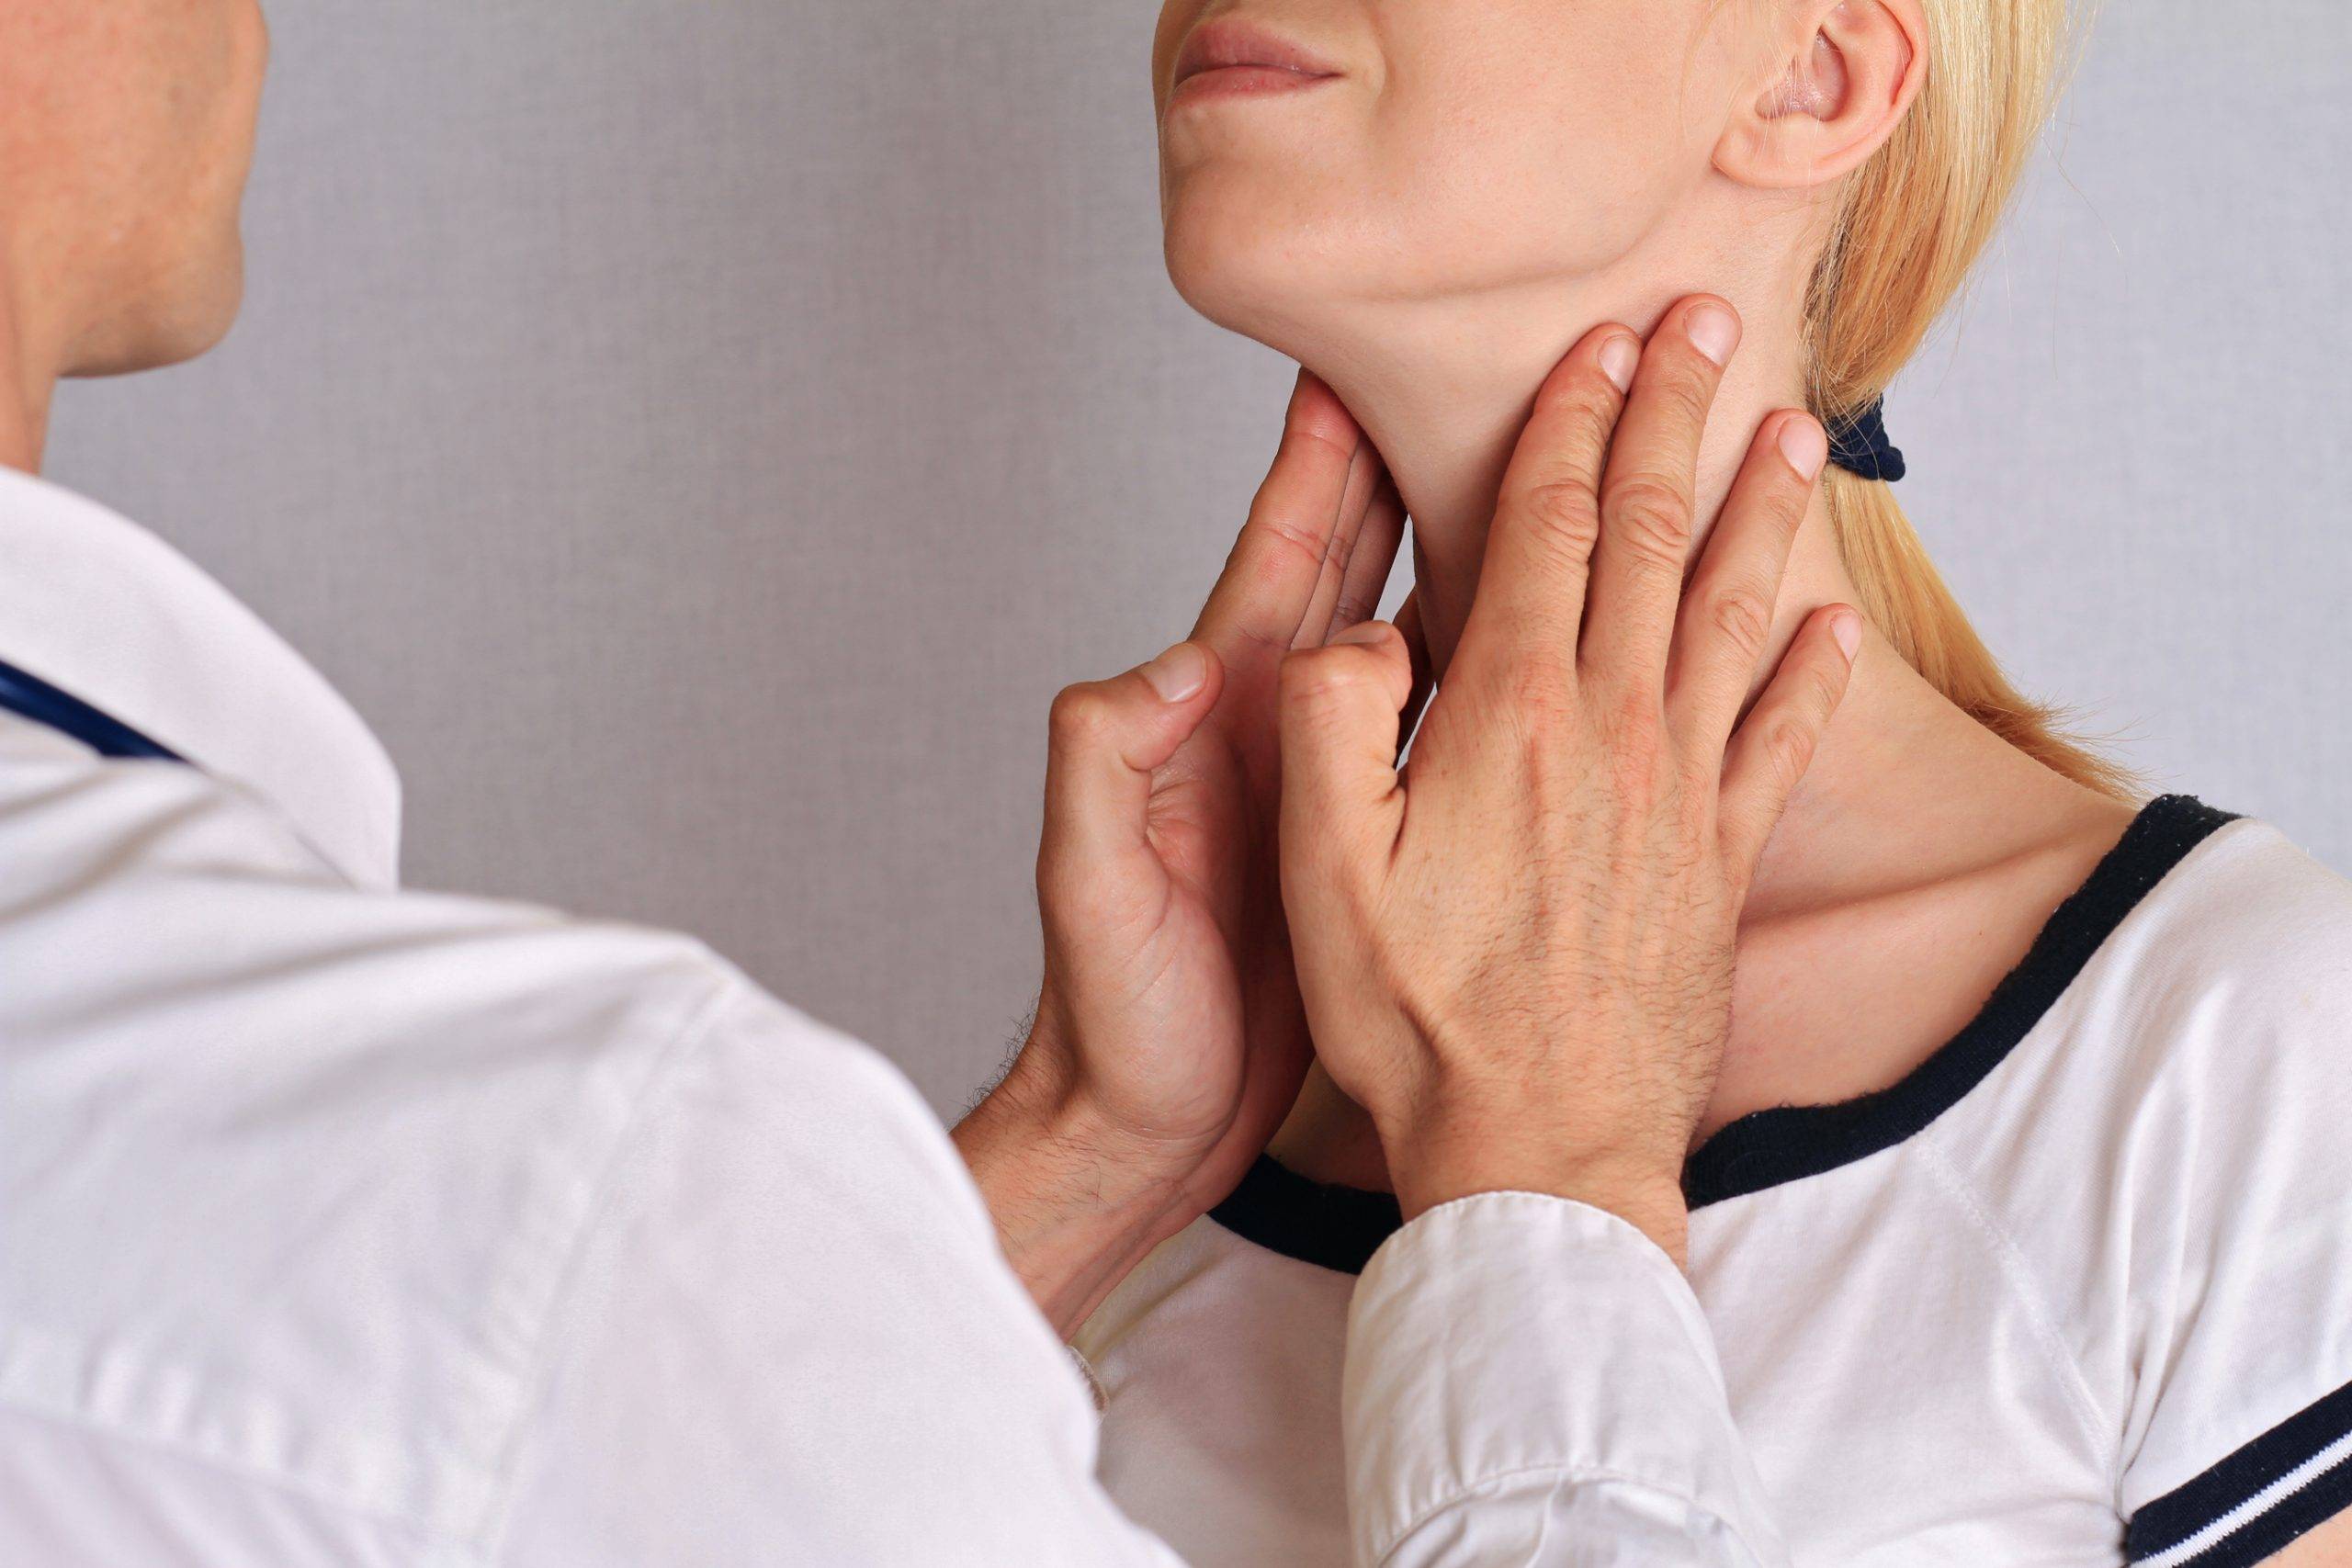 6 Things Every Thyroid Patient Should Know